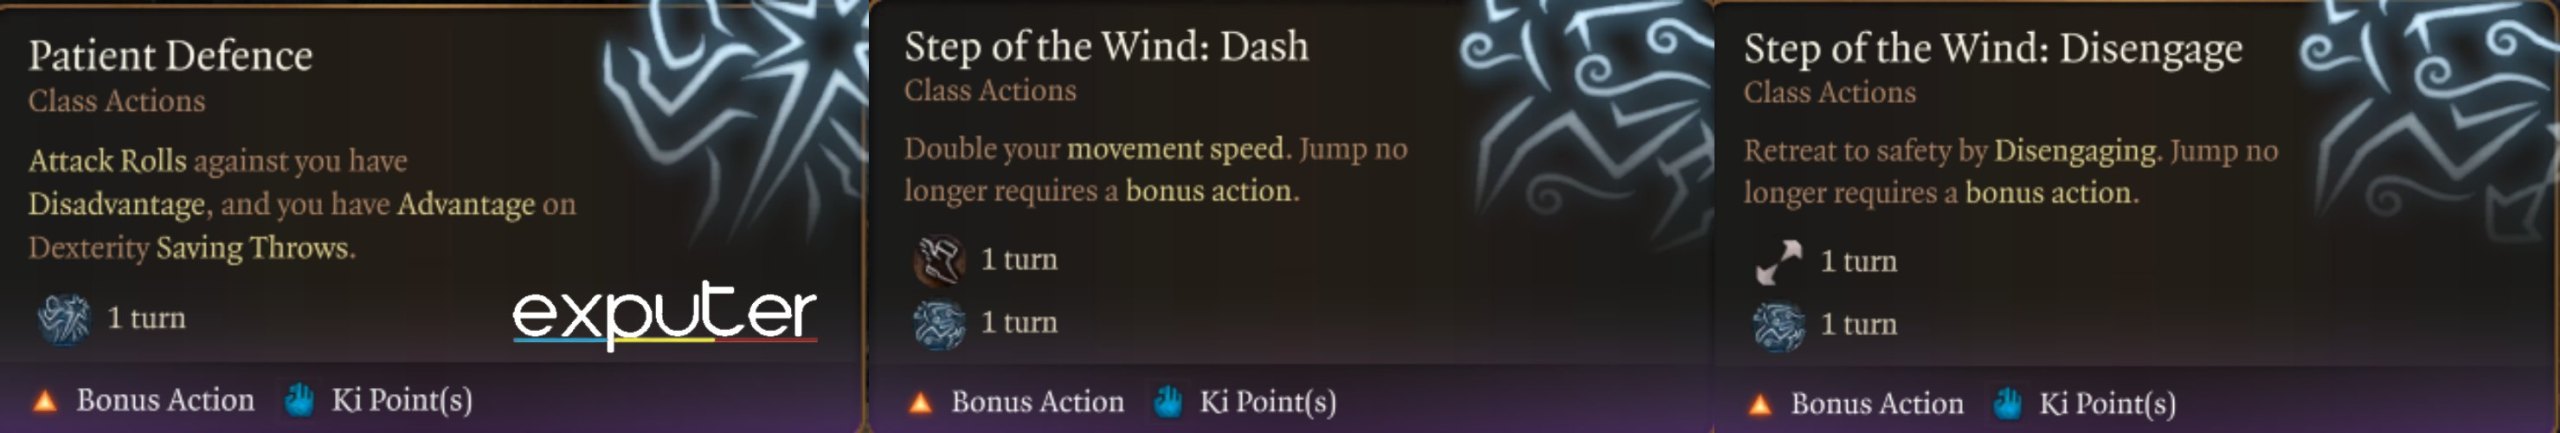 BG3 Actions: Patient Defence, Step of the Wind: Dash, Step of the Wind: Disengage 